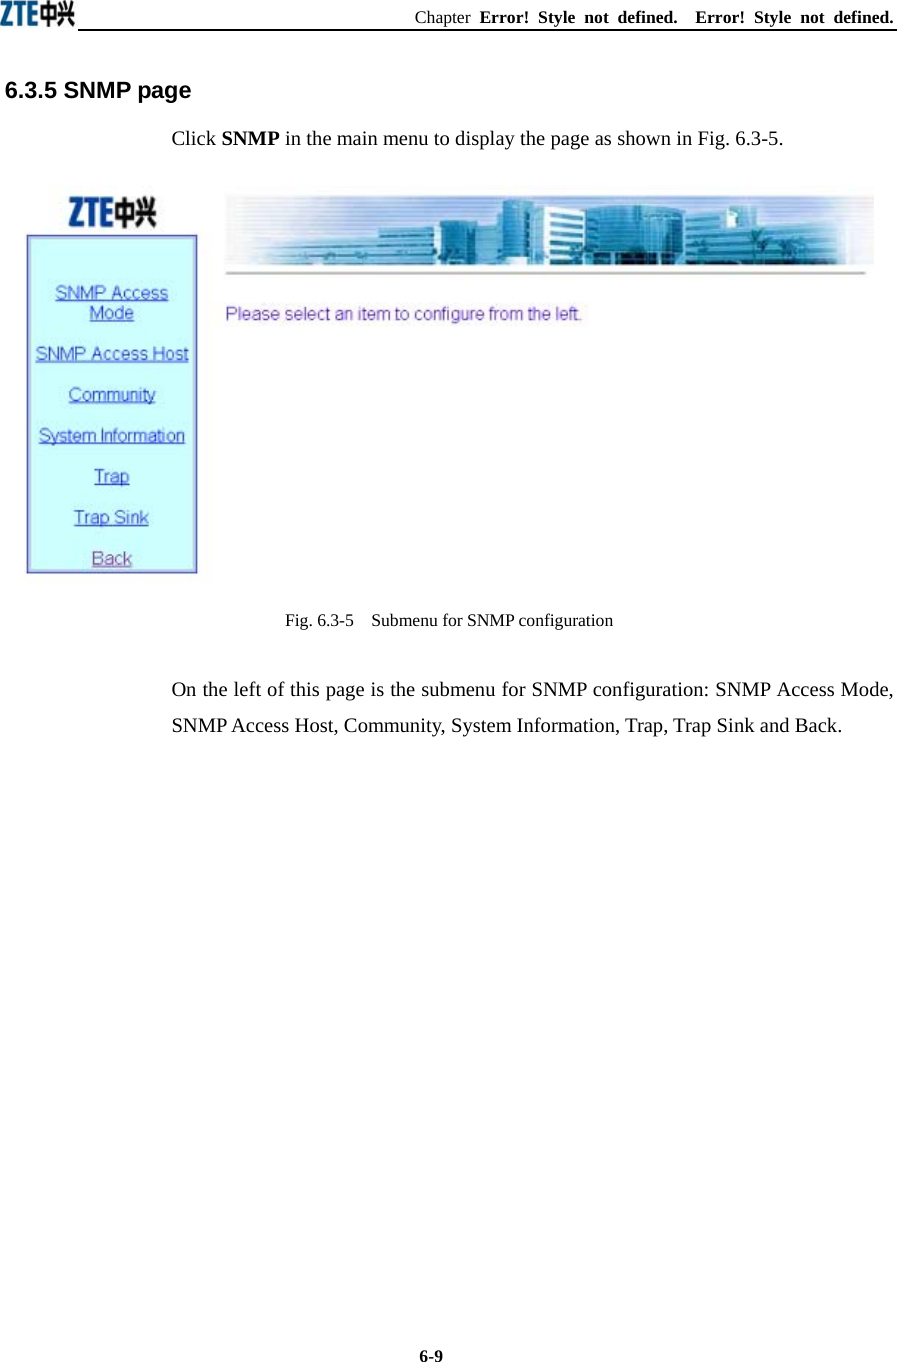 Chapter  Error! Style not defined.  Error! Style not defined.  6-9 6.3.5 SNMP page Click SNMP in the main menu to display the page as shown in Fig. 6.3-5.  Fig. 6.3-5    Submenu for SNMP configuration On the left of this page is the submenu for SNMP configuration: SNMP Access Mode, SNMP Access Host, Community, System Information, Trap, Trap Sink and Back.               